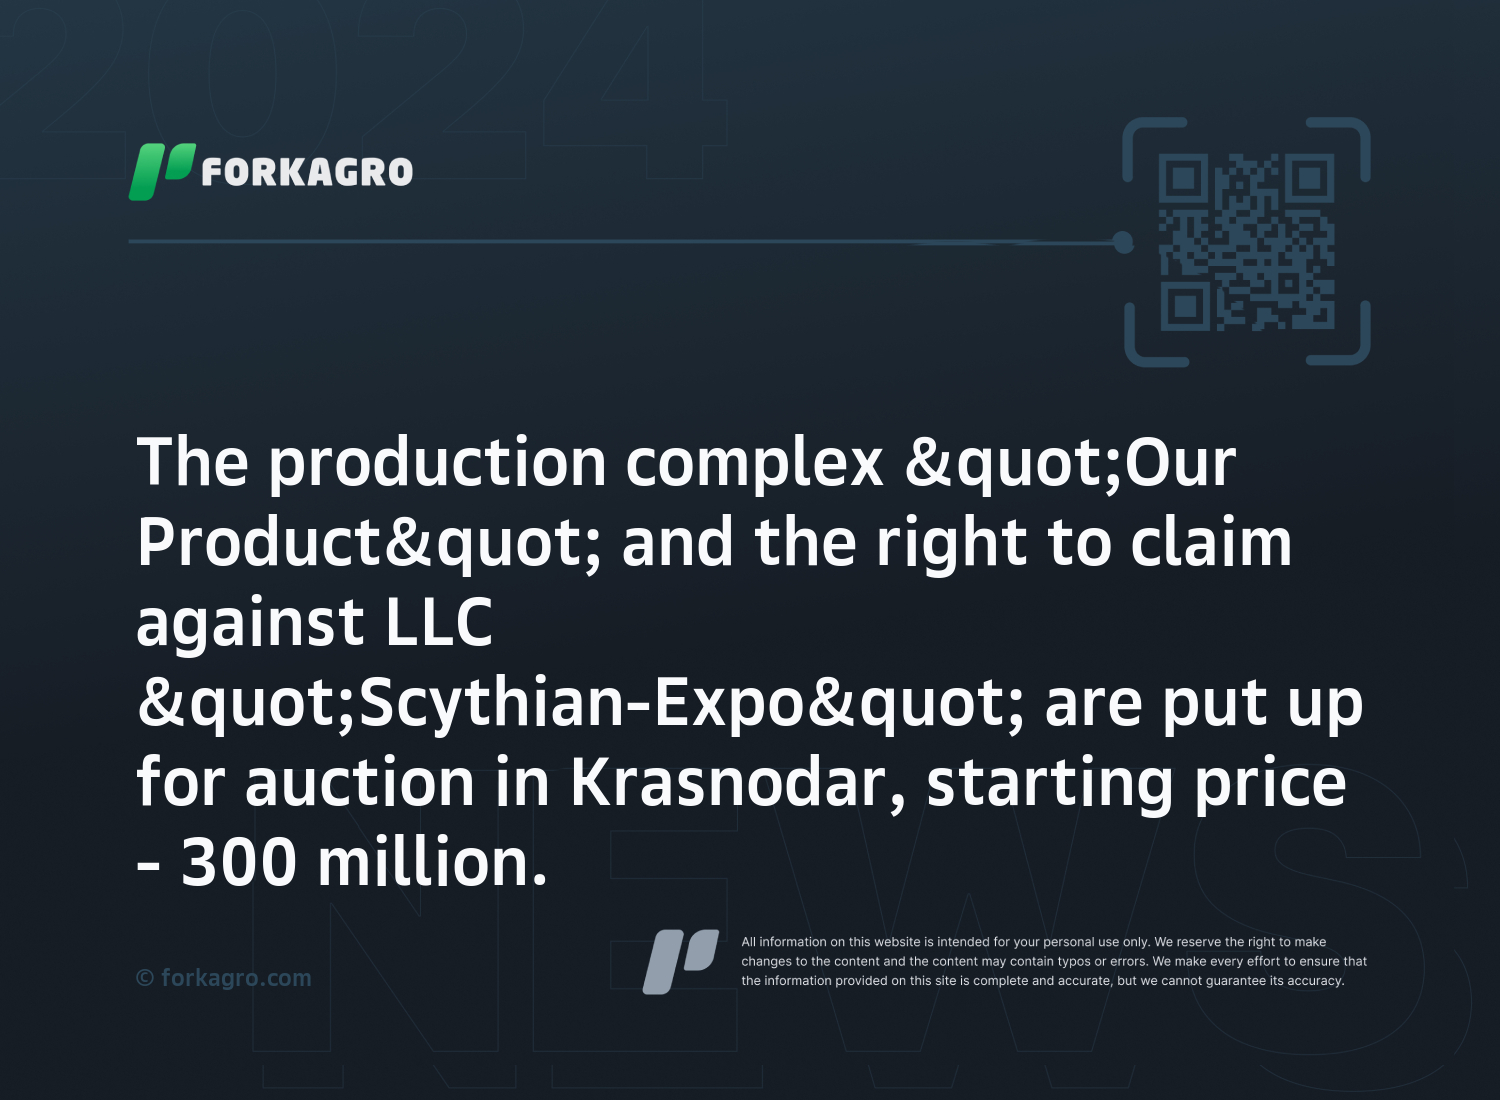 The production complex "Our Product" and the right to claim against LLC "Scythian-Expo" are put up for auction in Krasnodar, starting price - 300 million.